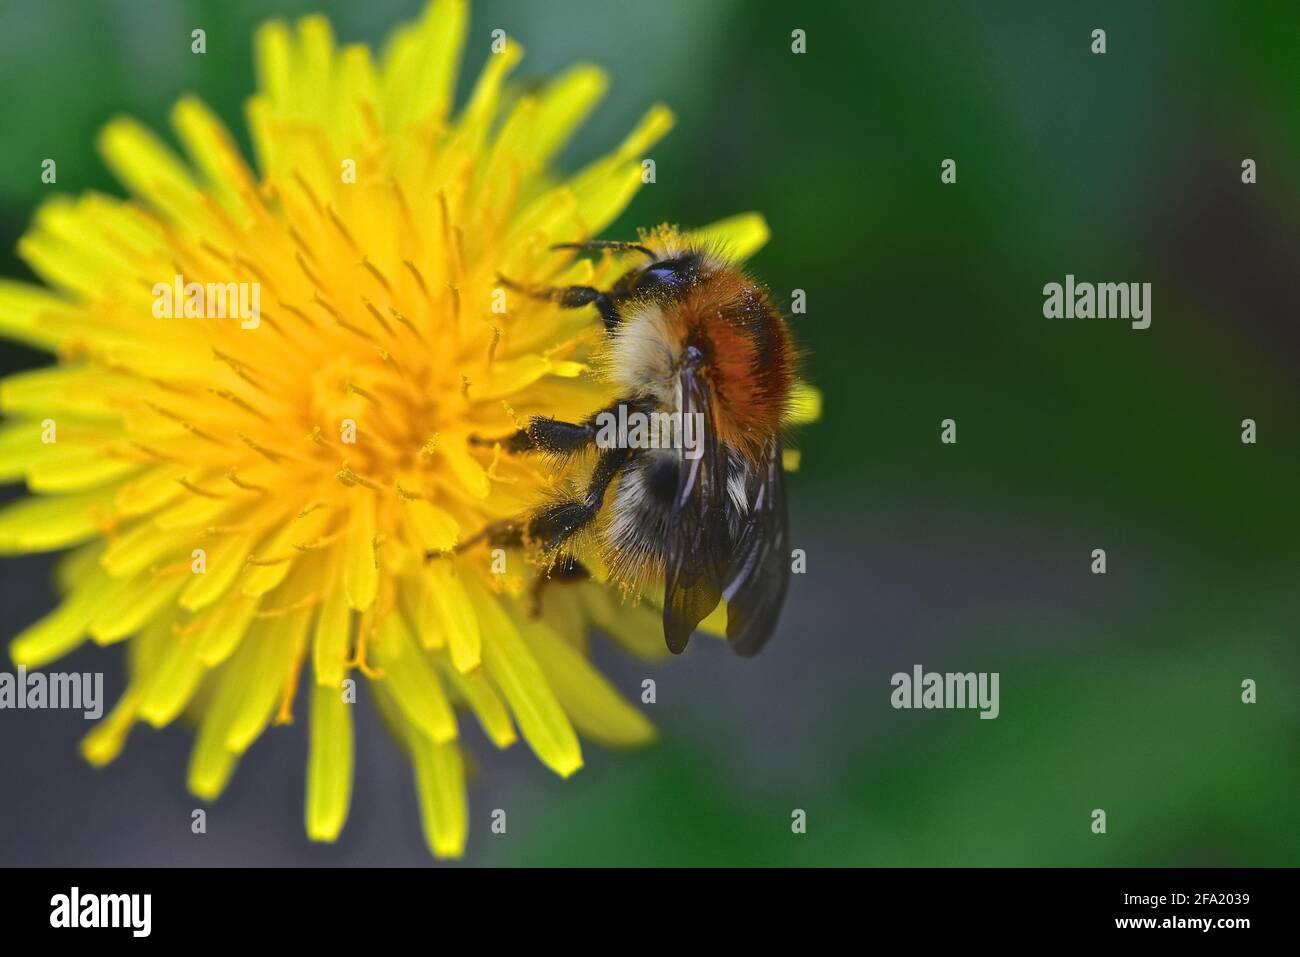 Close up view of Common Carder Bee (Bombus pascuorum) pollinating a Dandelion flower Stock Photo